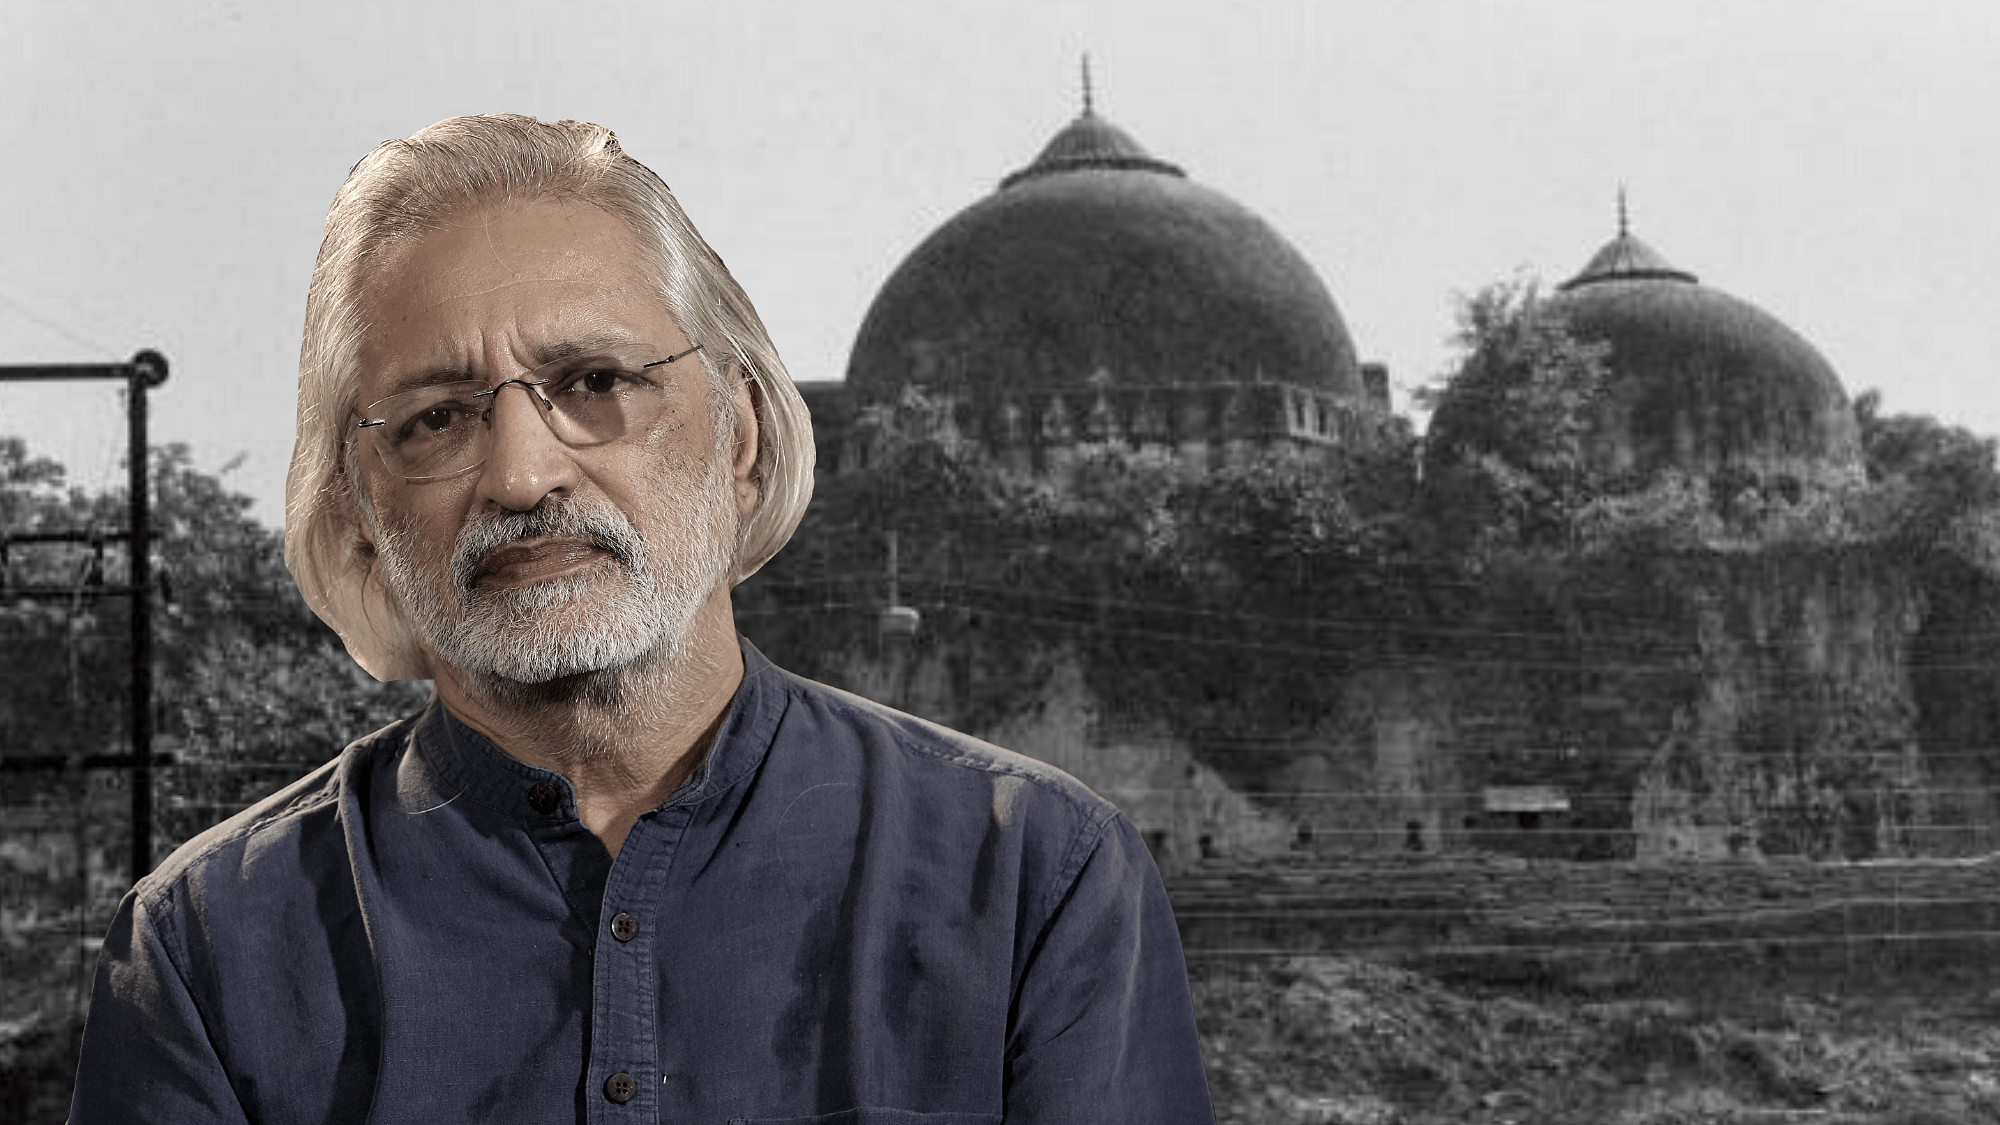 Anand Patwardhan tells us about the lessons we must remember from Ayodhya so that the bloody history of riots and violence does not repeat itself.